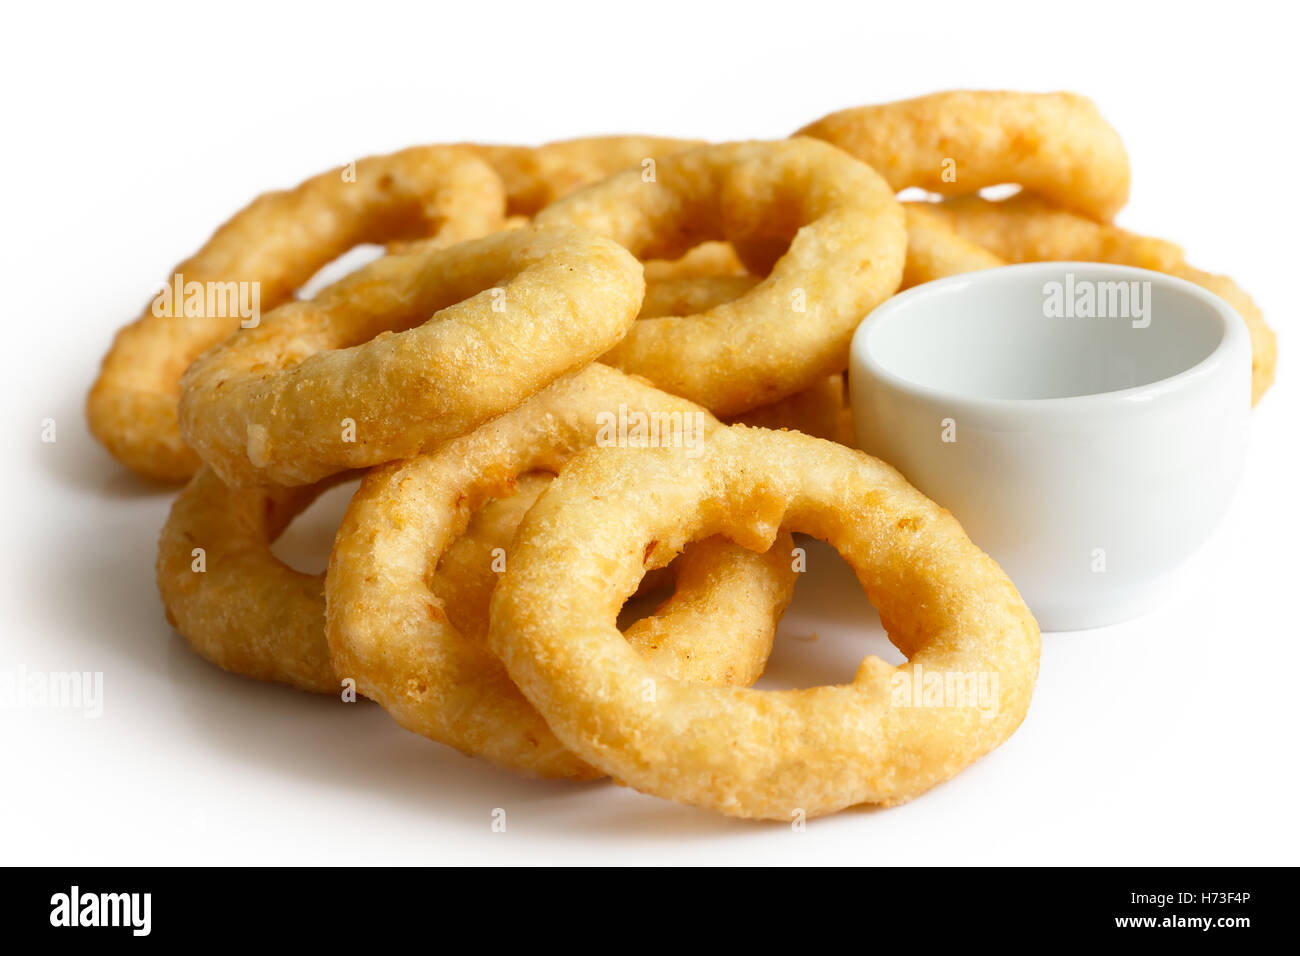 Heap of deep fried onion or calamari rings with dipping dish isolated on white. Stock Photo